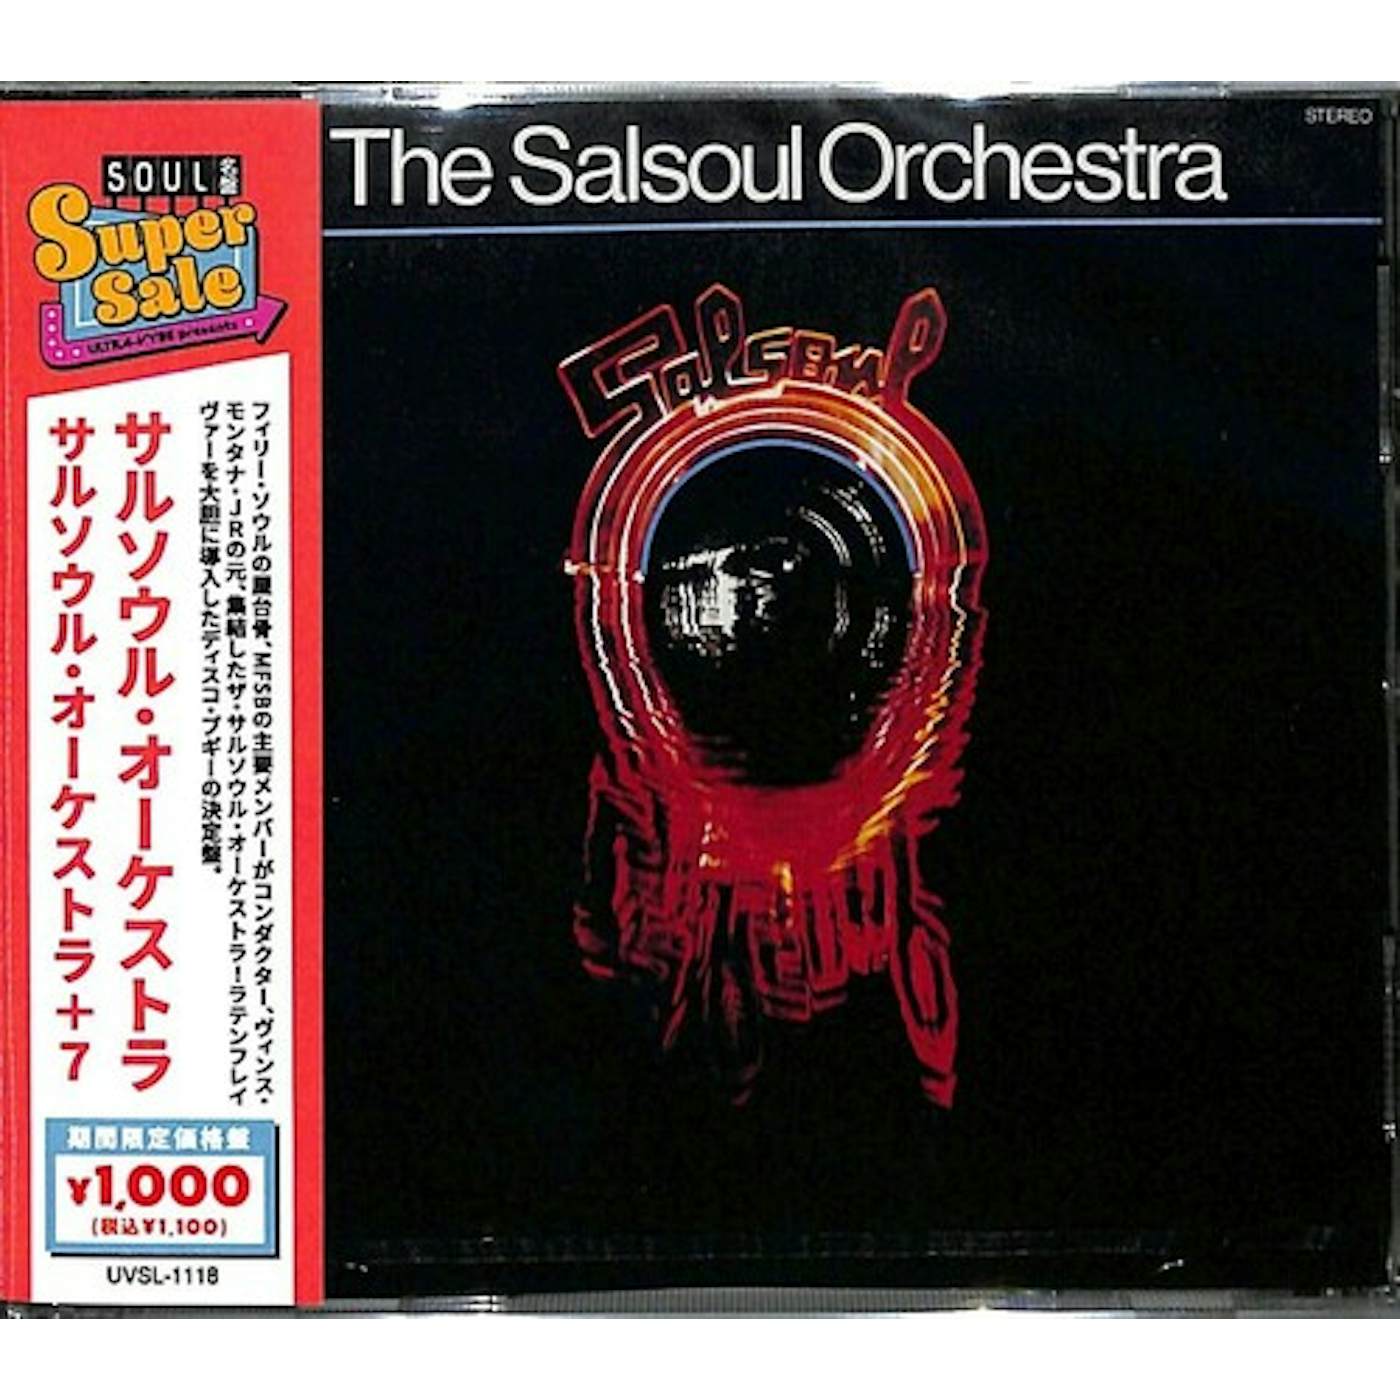 The Salsoul Orchestra CD